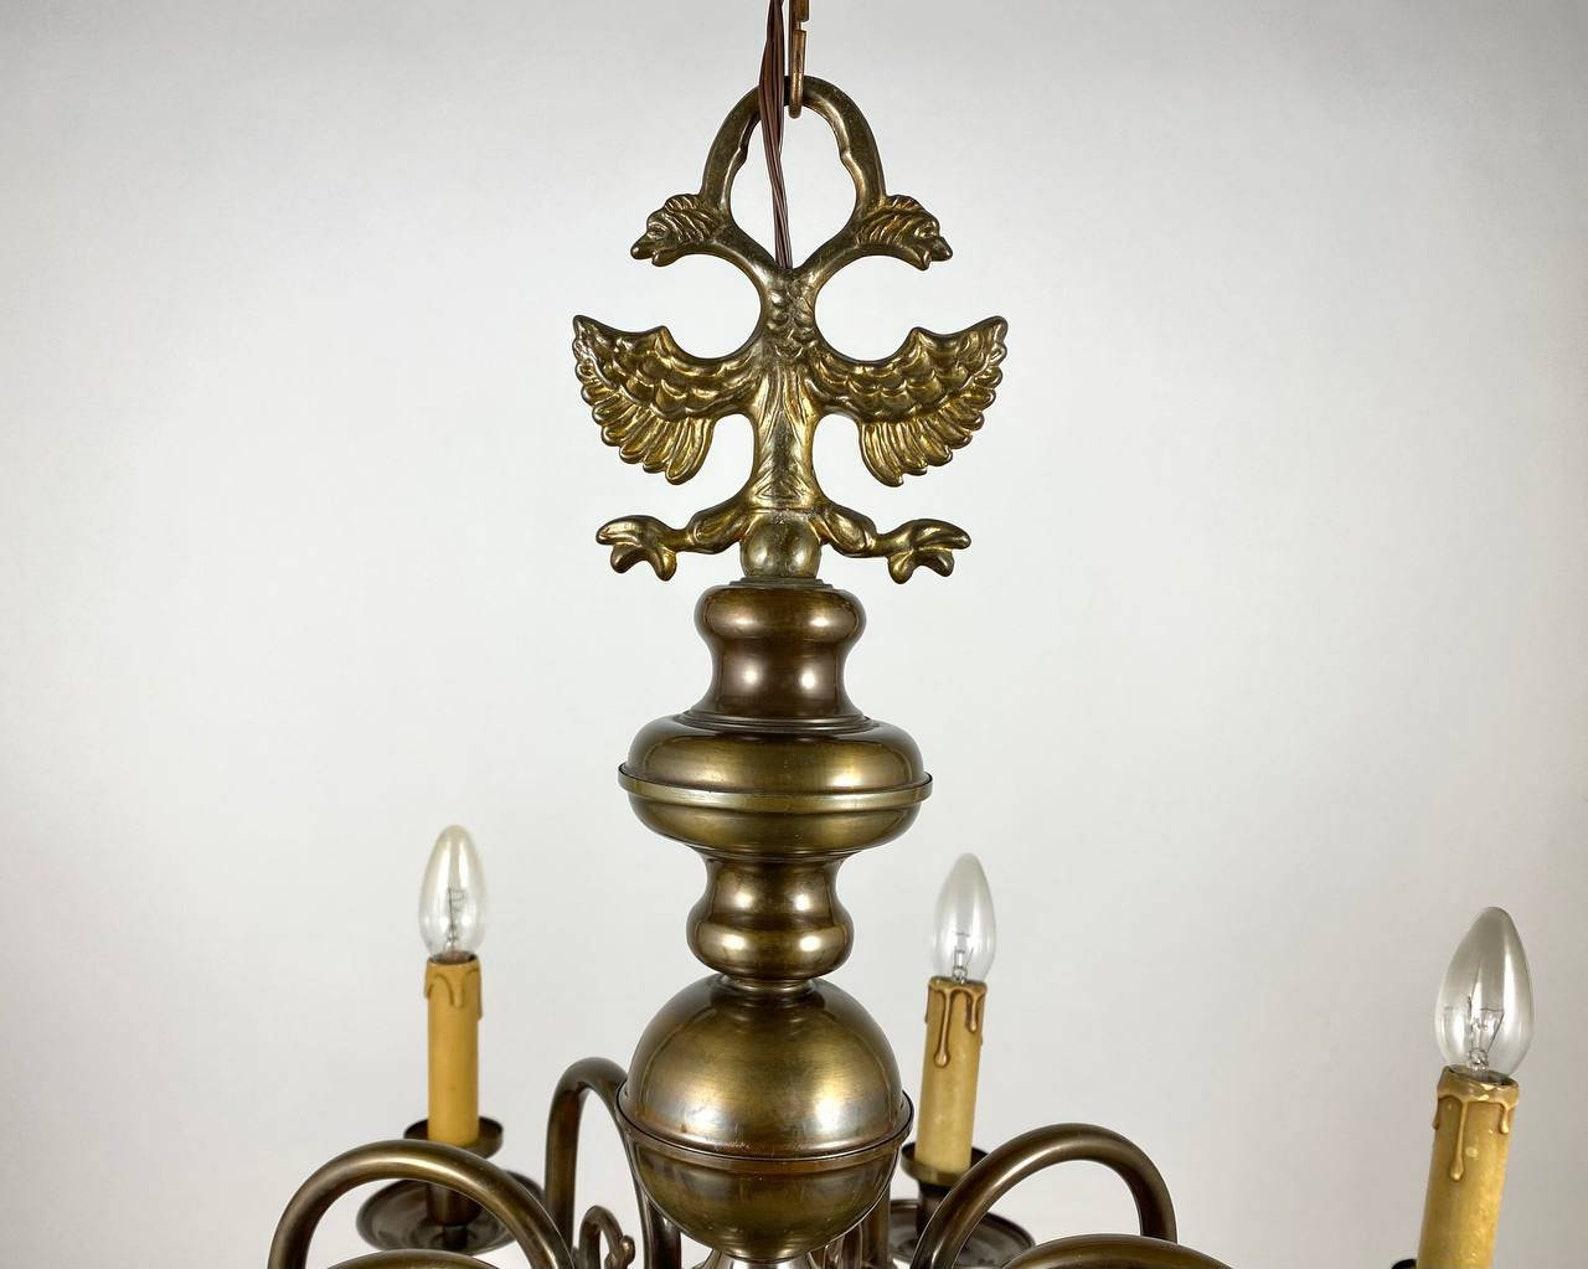 Other Vintage Chandelier With Double-Headed Eagle Flemish-Style Brass Lighting